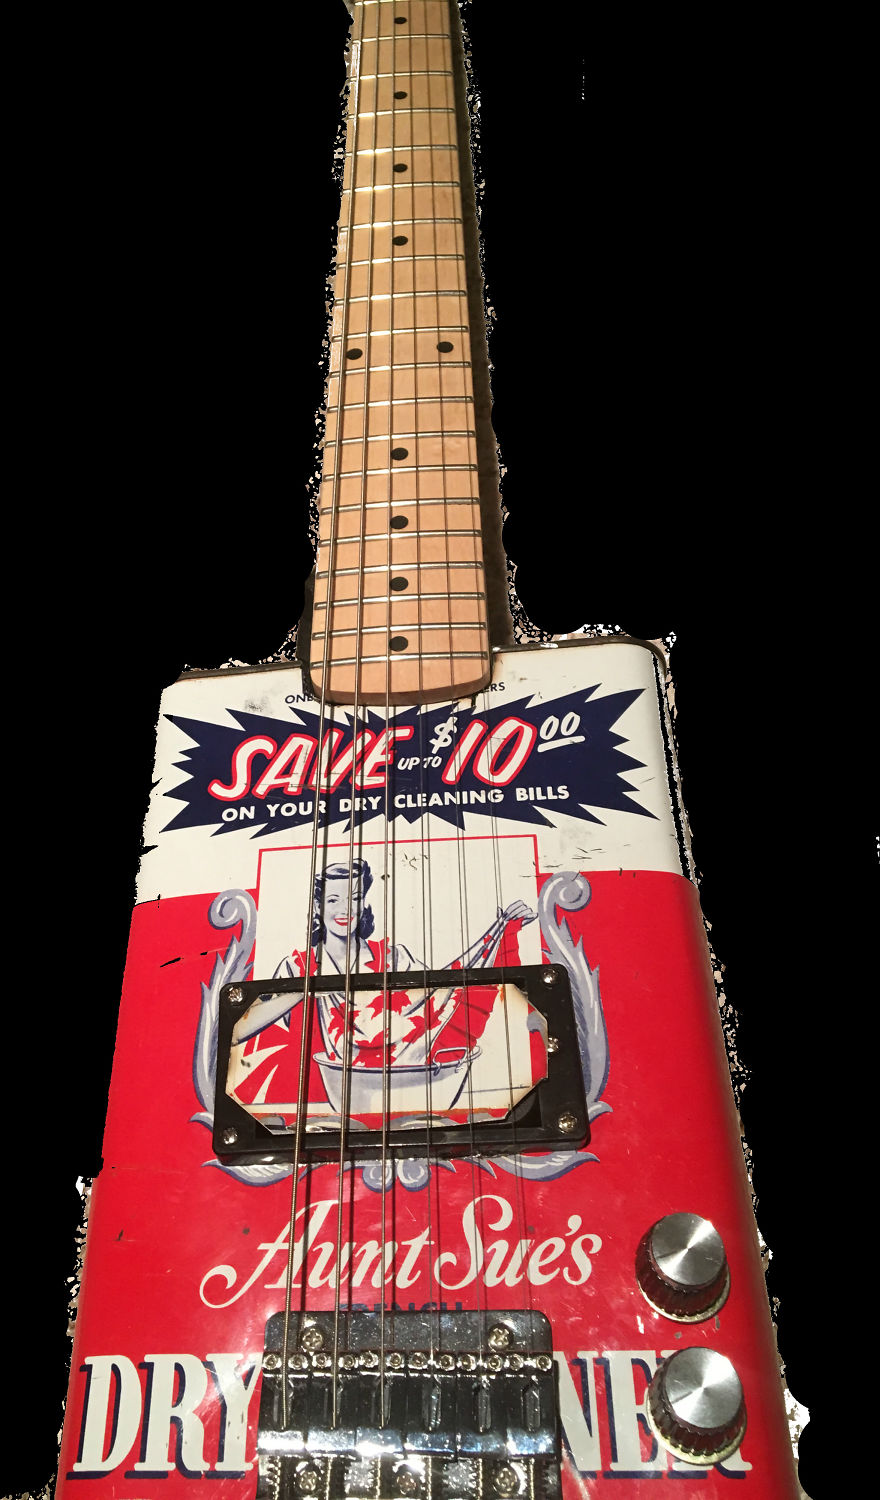 Genius builds guitars out of old oil cans, world becomes better place - CNET